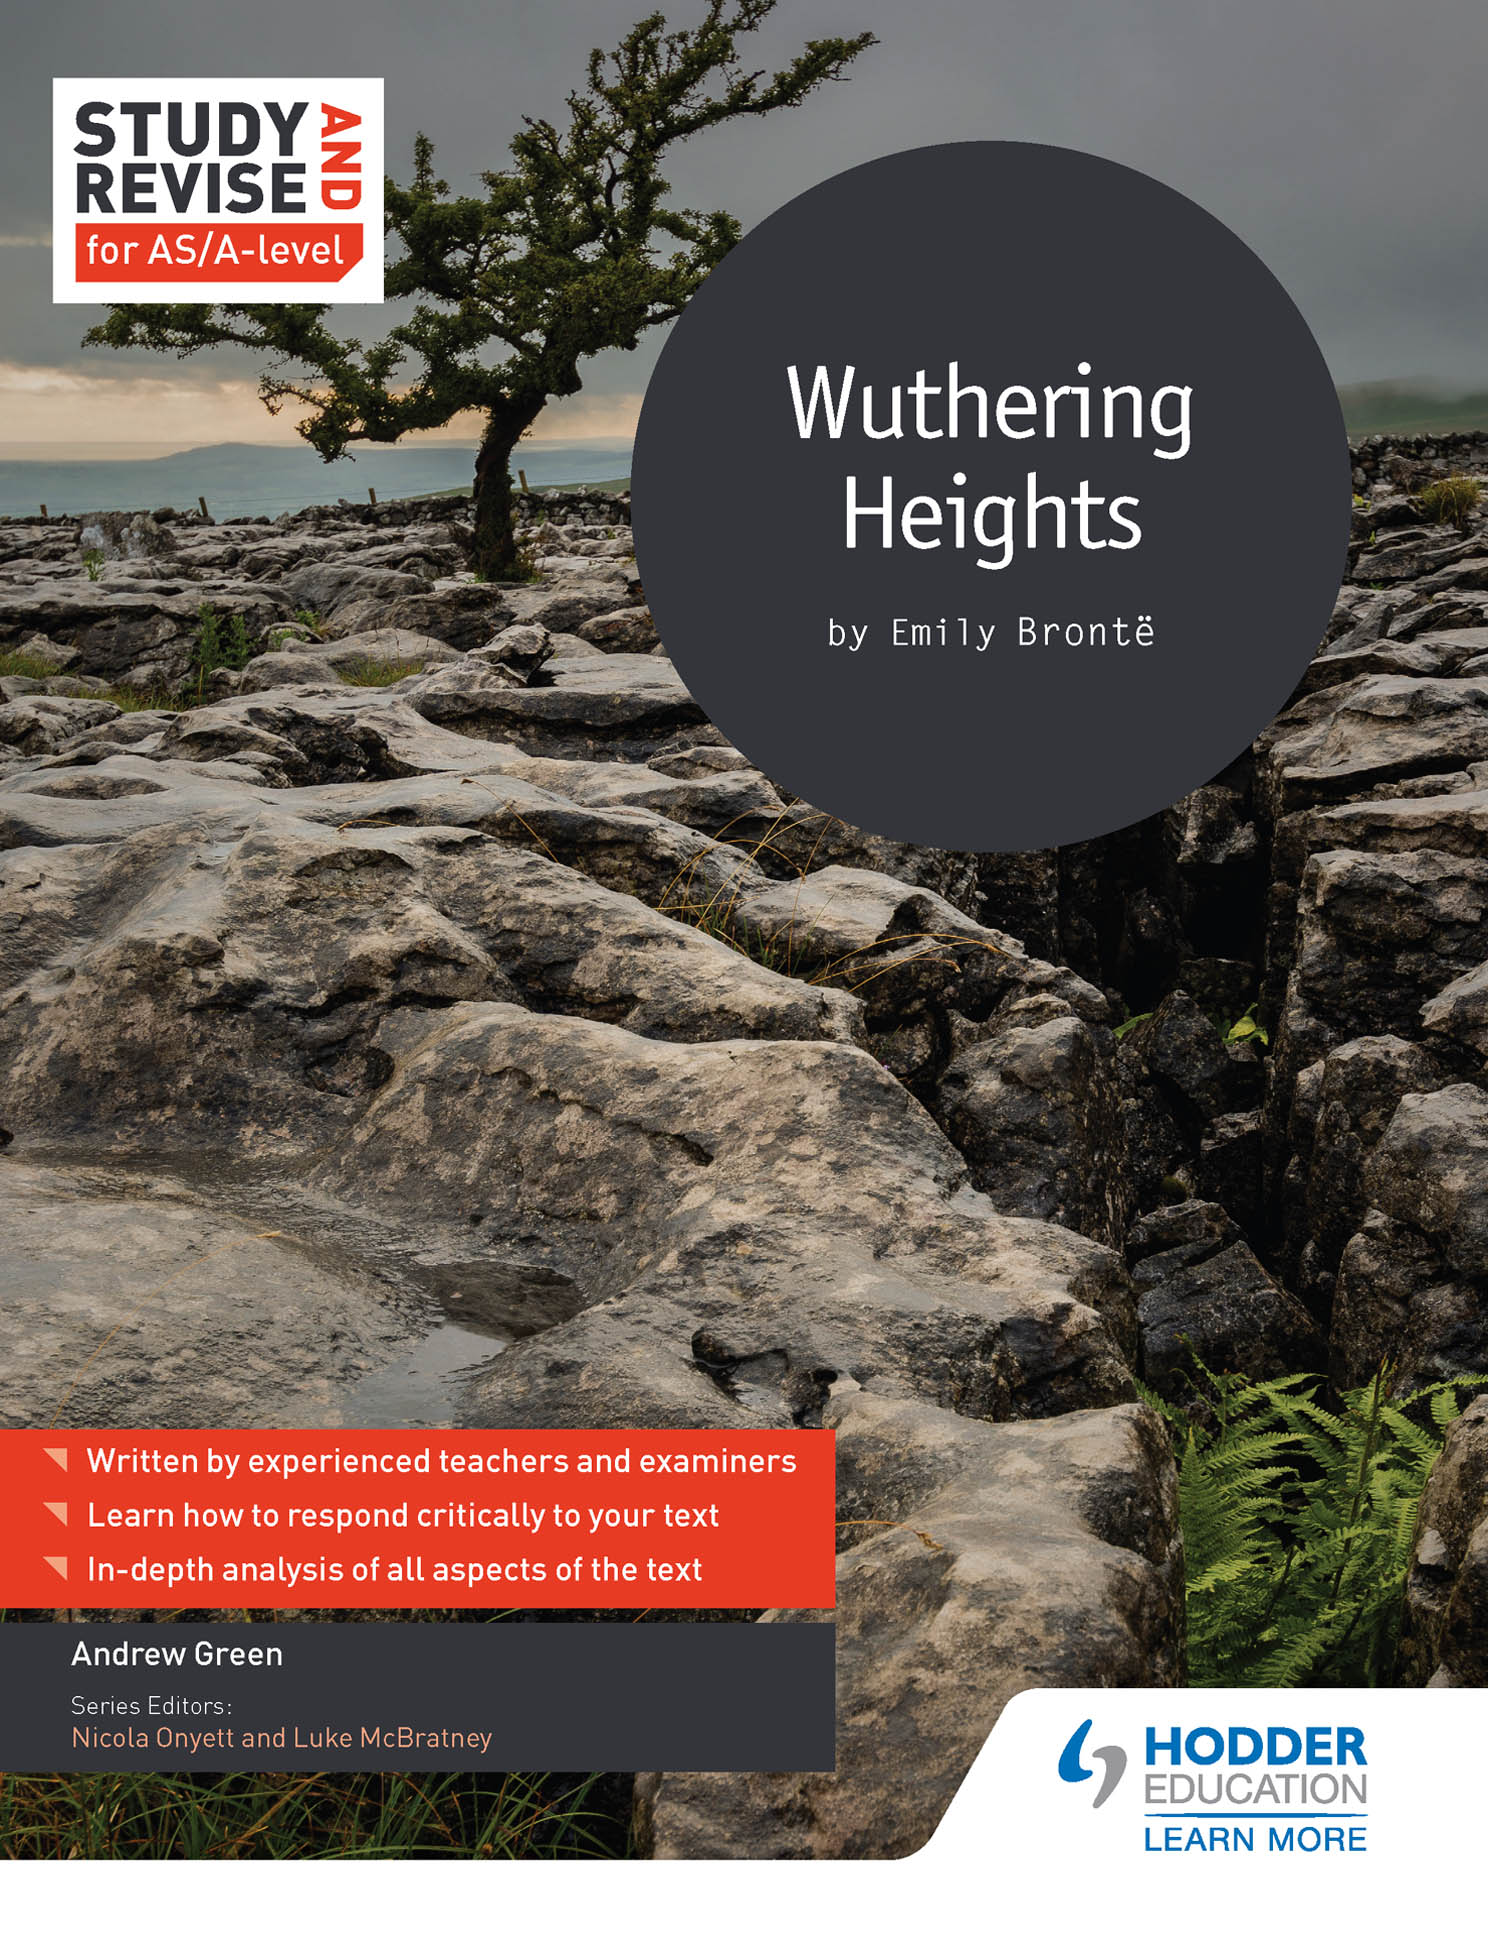 [DESCATALOGADO] Study and Revise for AS/A-level: Wuthering Heights